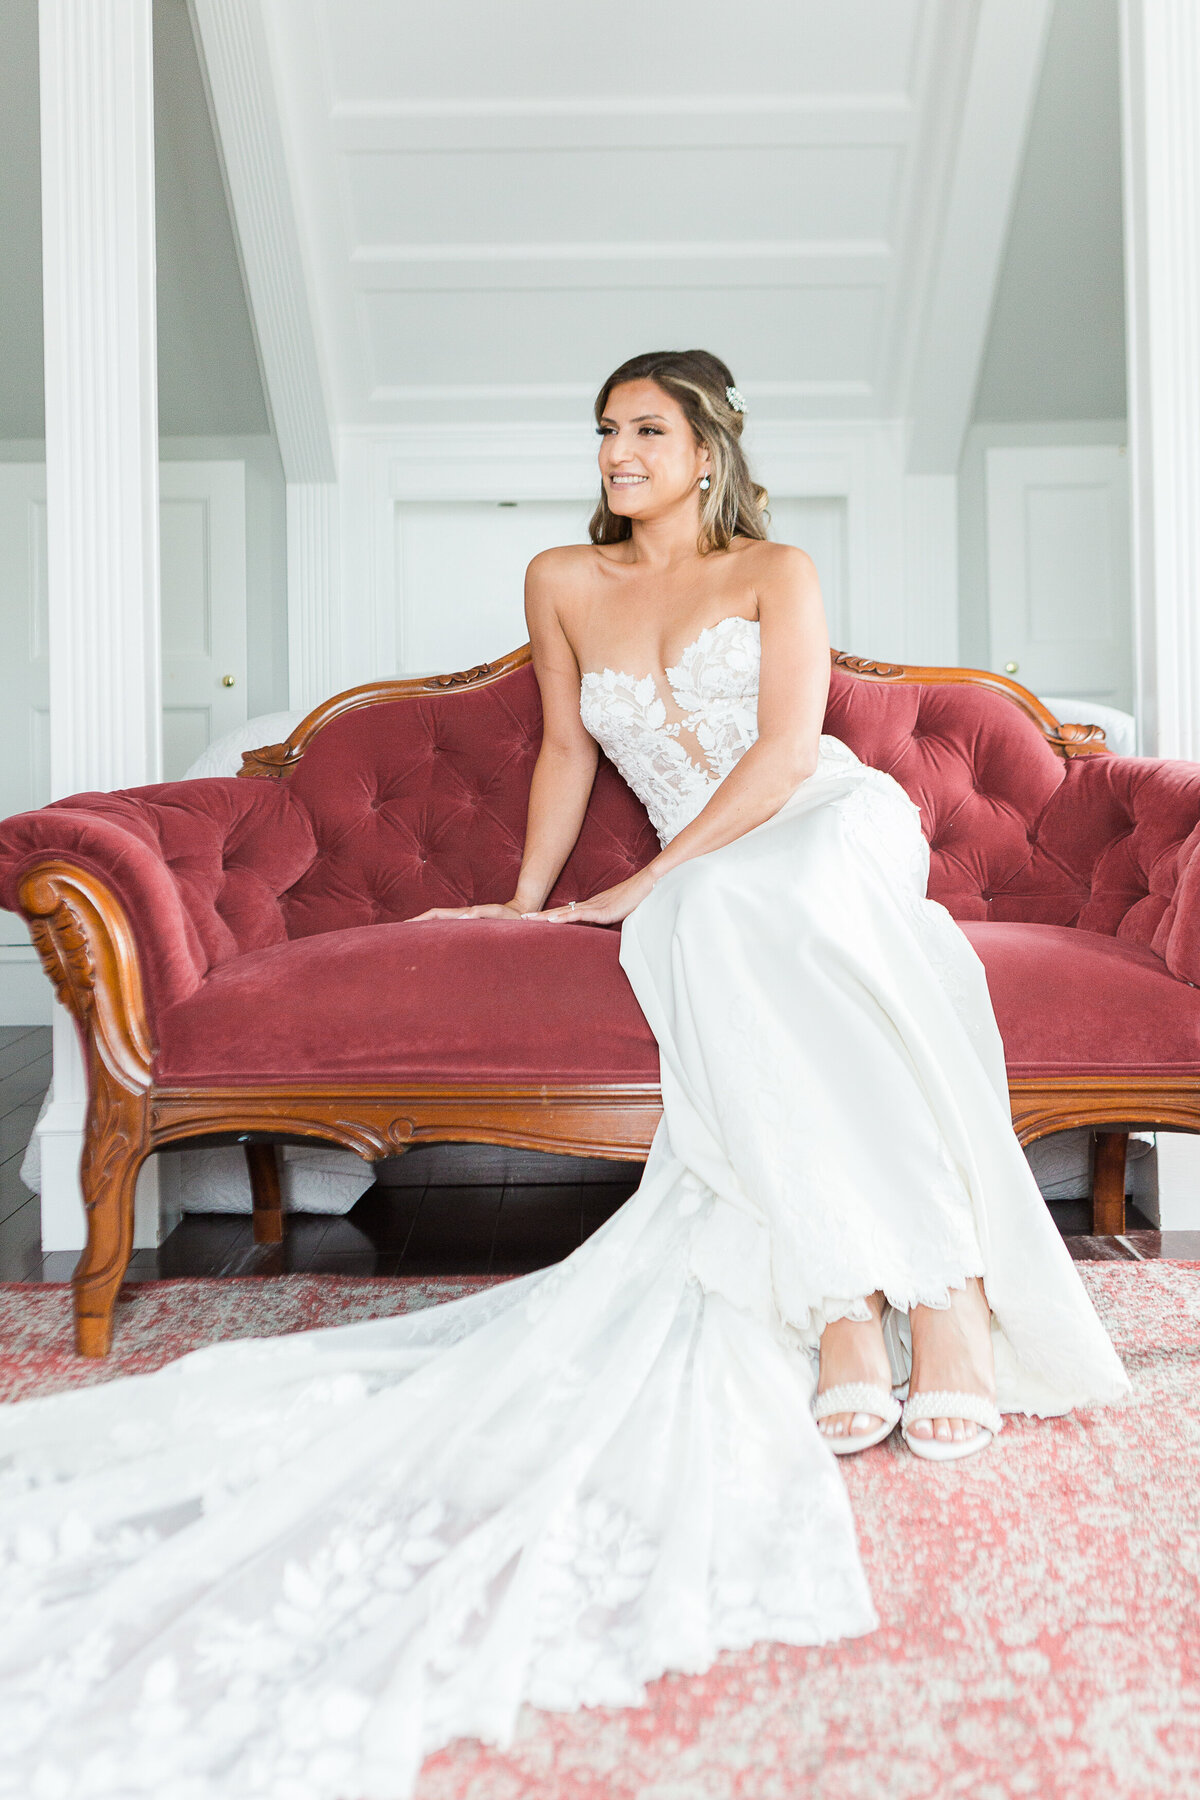 Bride is sitting on a burgundy velvet touch for a formal bridal portrait. She is smiling over her shoulder in the distance. Captured by best Massachusetts wedding photographer Lia Rose Weddings.